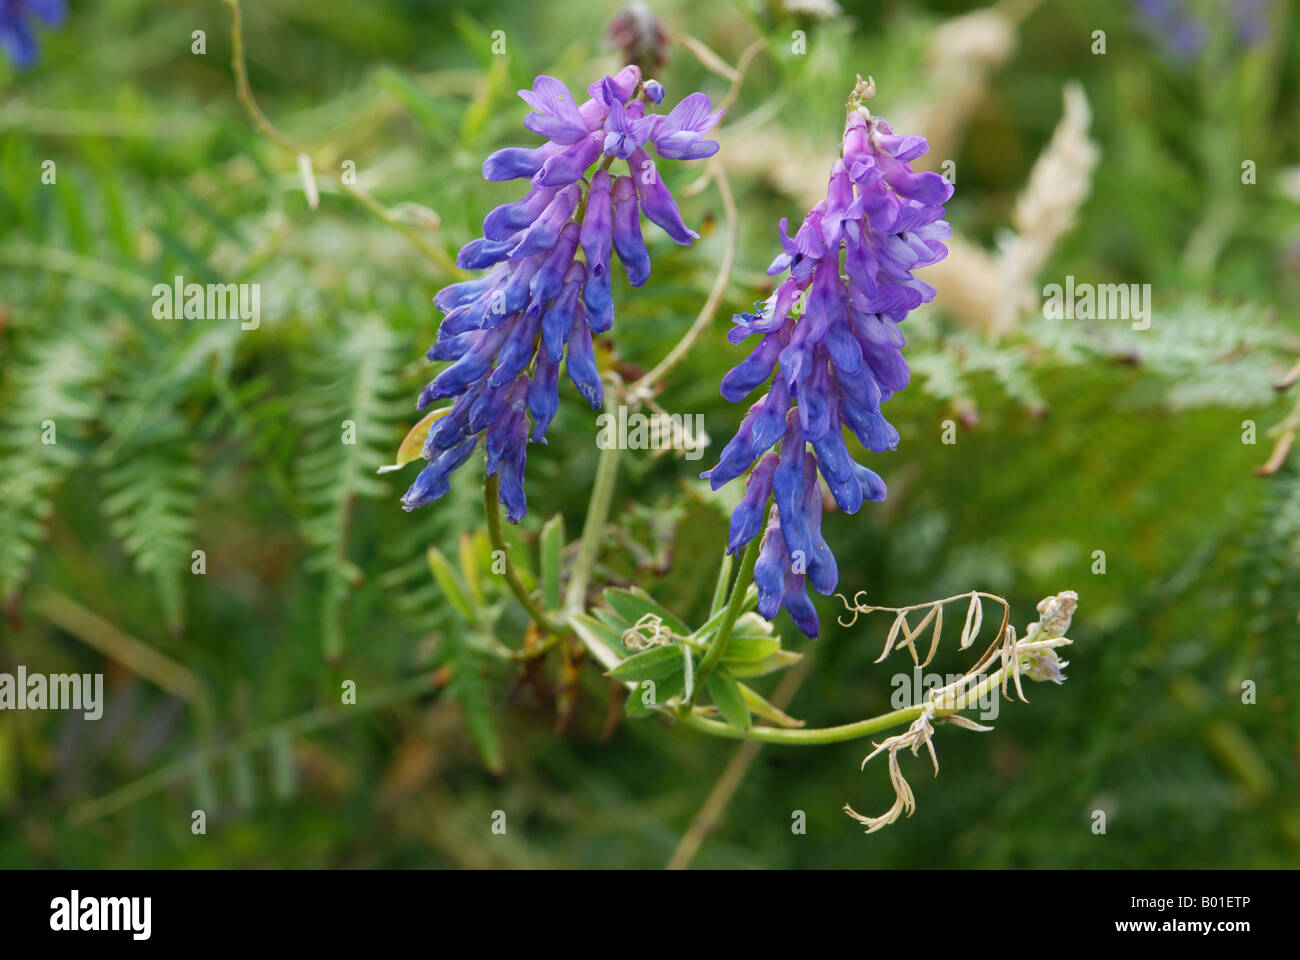 Tufted Vetch in detail Stock Photo